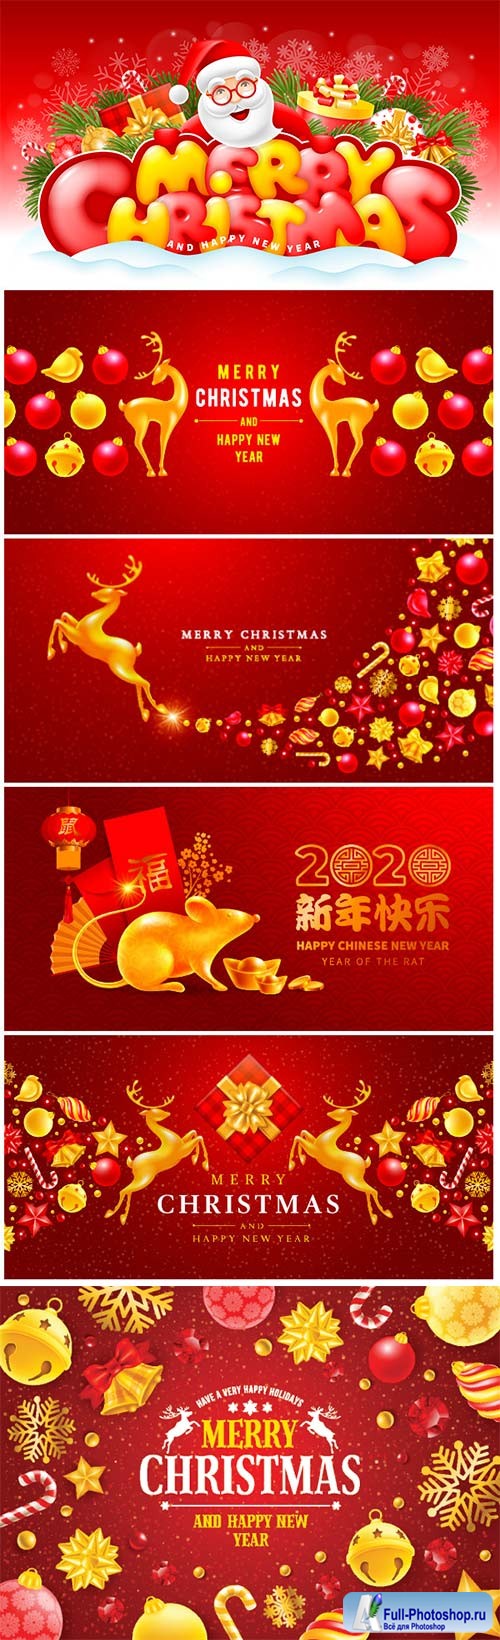 Cheerful and bright congratulation design for Christmas 